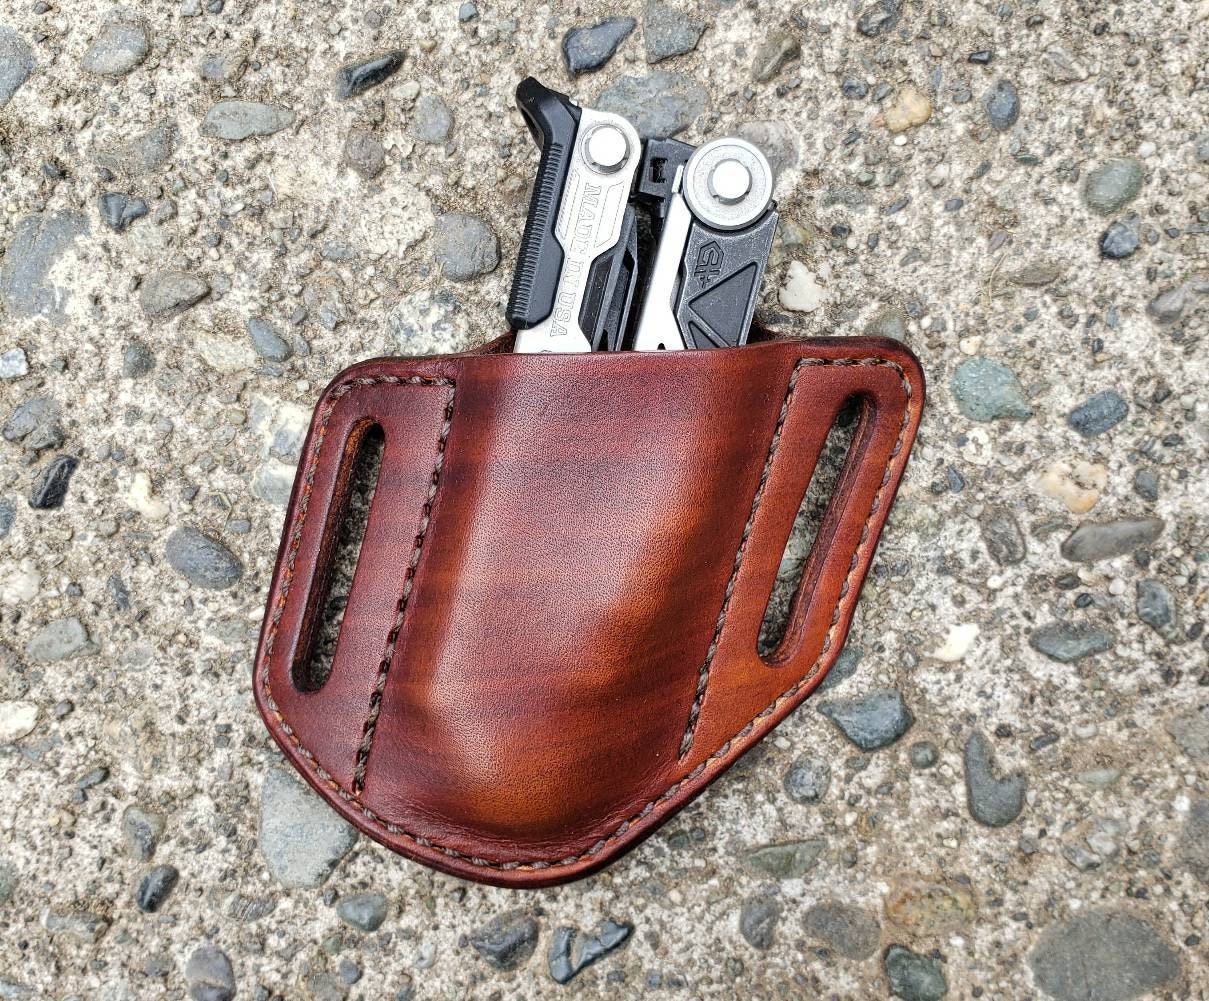 Beginner leather craft every day carry : r/Leathercraft